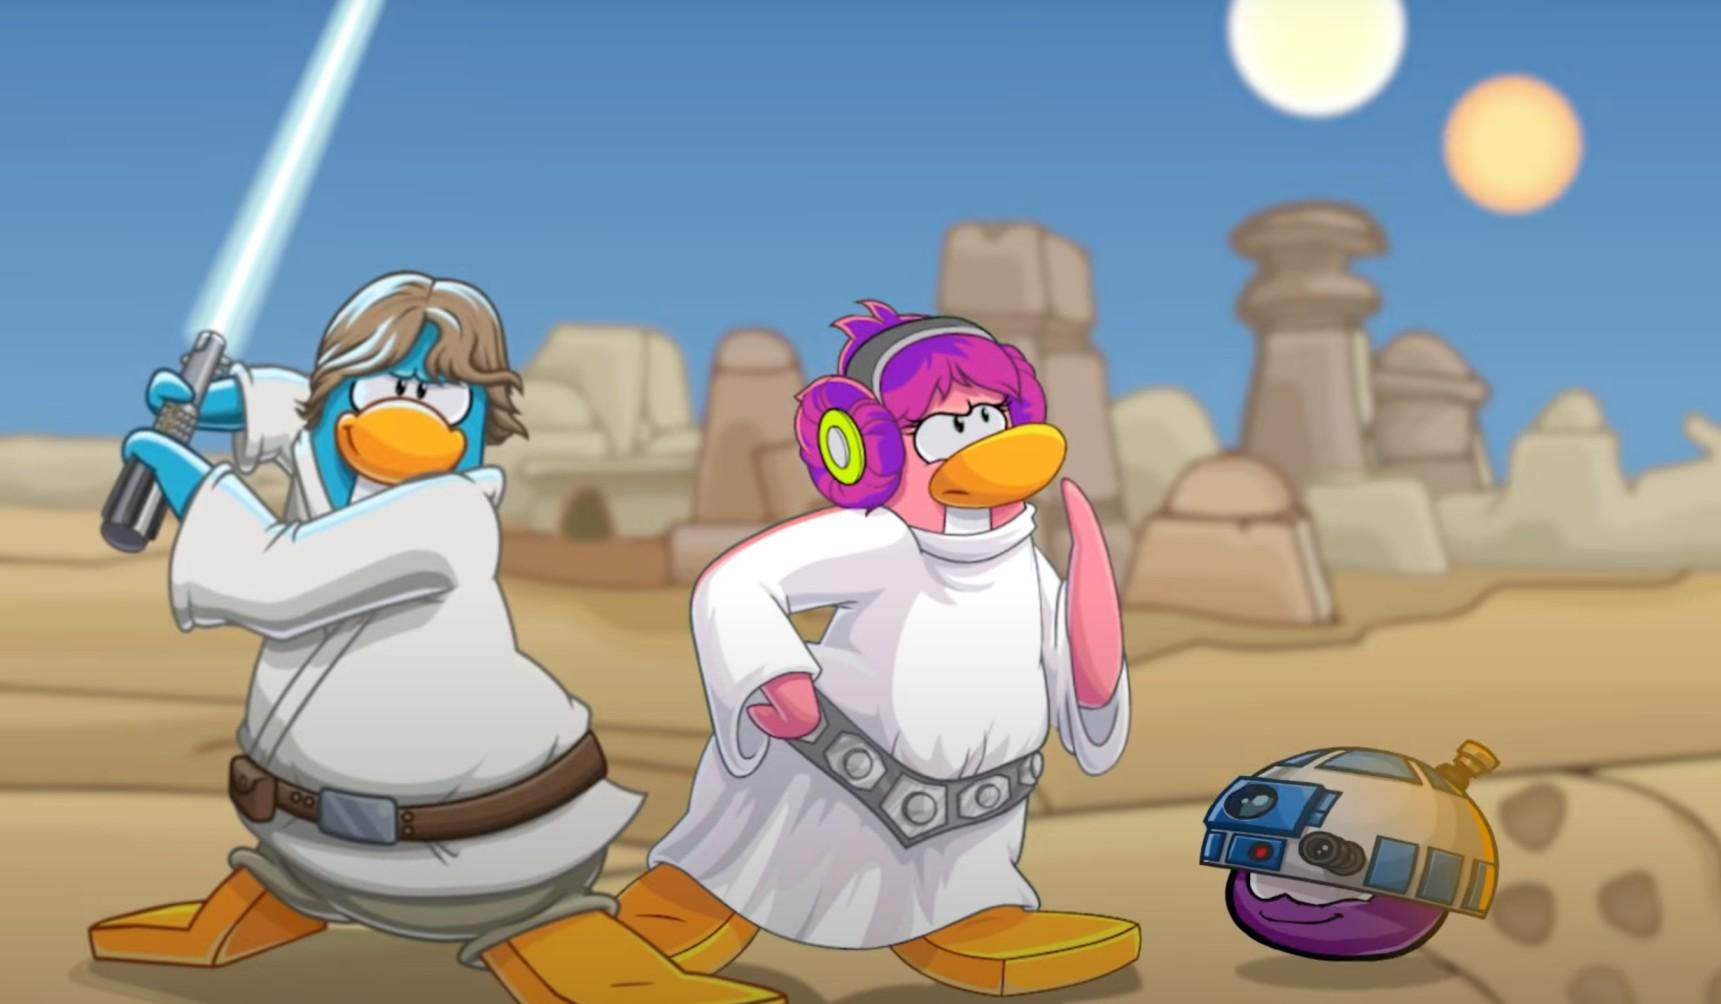 Two characters from New Club Penguin are dressed as Star Wars characters, flanked by an R2D2-like character.